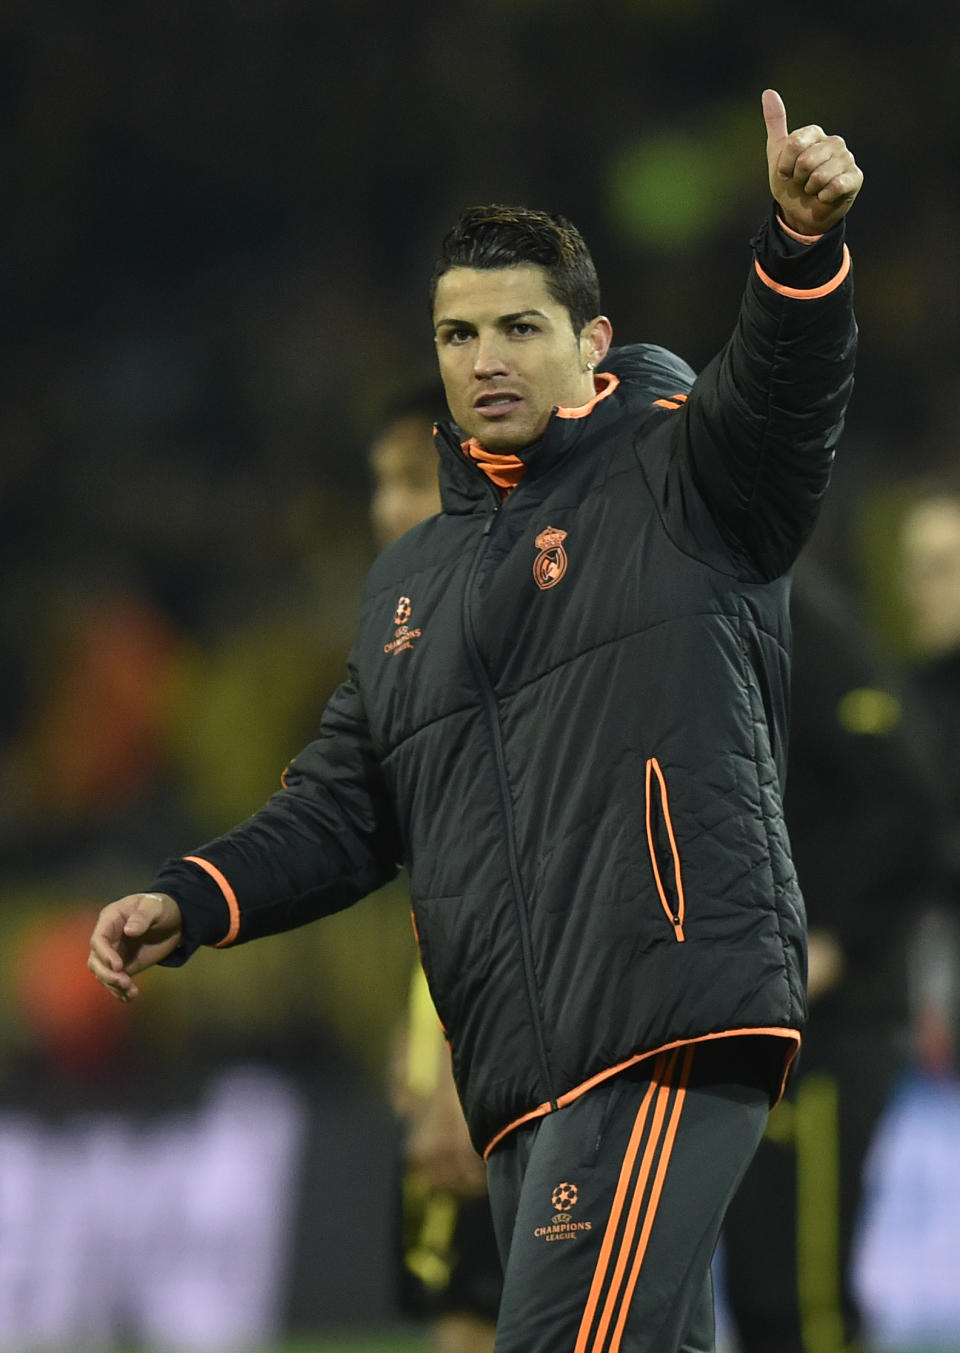 Real's Cristiano Ronaldo waves to his supporters at the end of the the Champions League quarterfinal second leg soccer match between Borussia Dortmund and Real Madrid in the Signal Iduna stadium in Dortmund, Germany, Tuesday, April 8, 2014. (AP Photo/Martin Meissner)